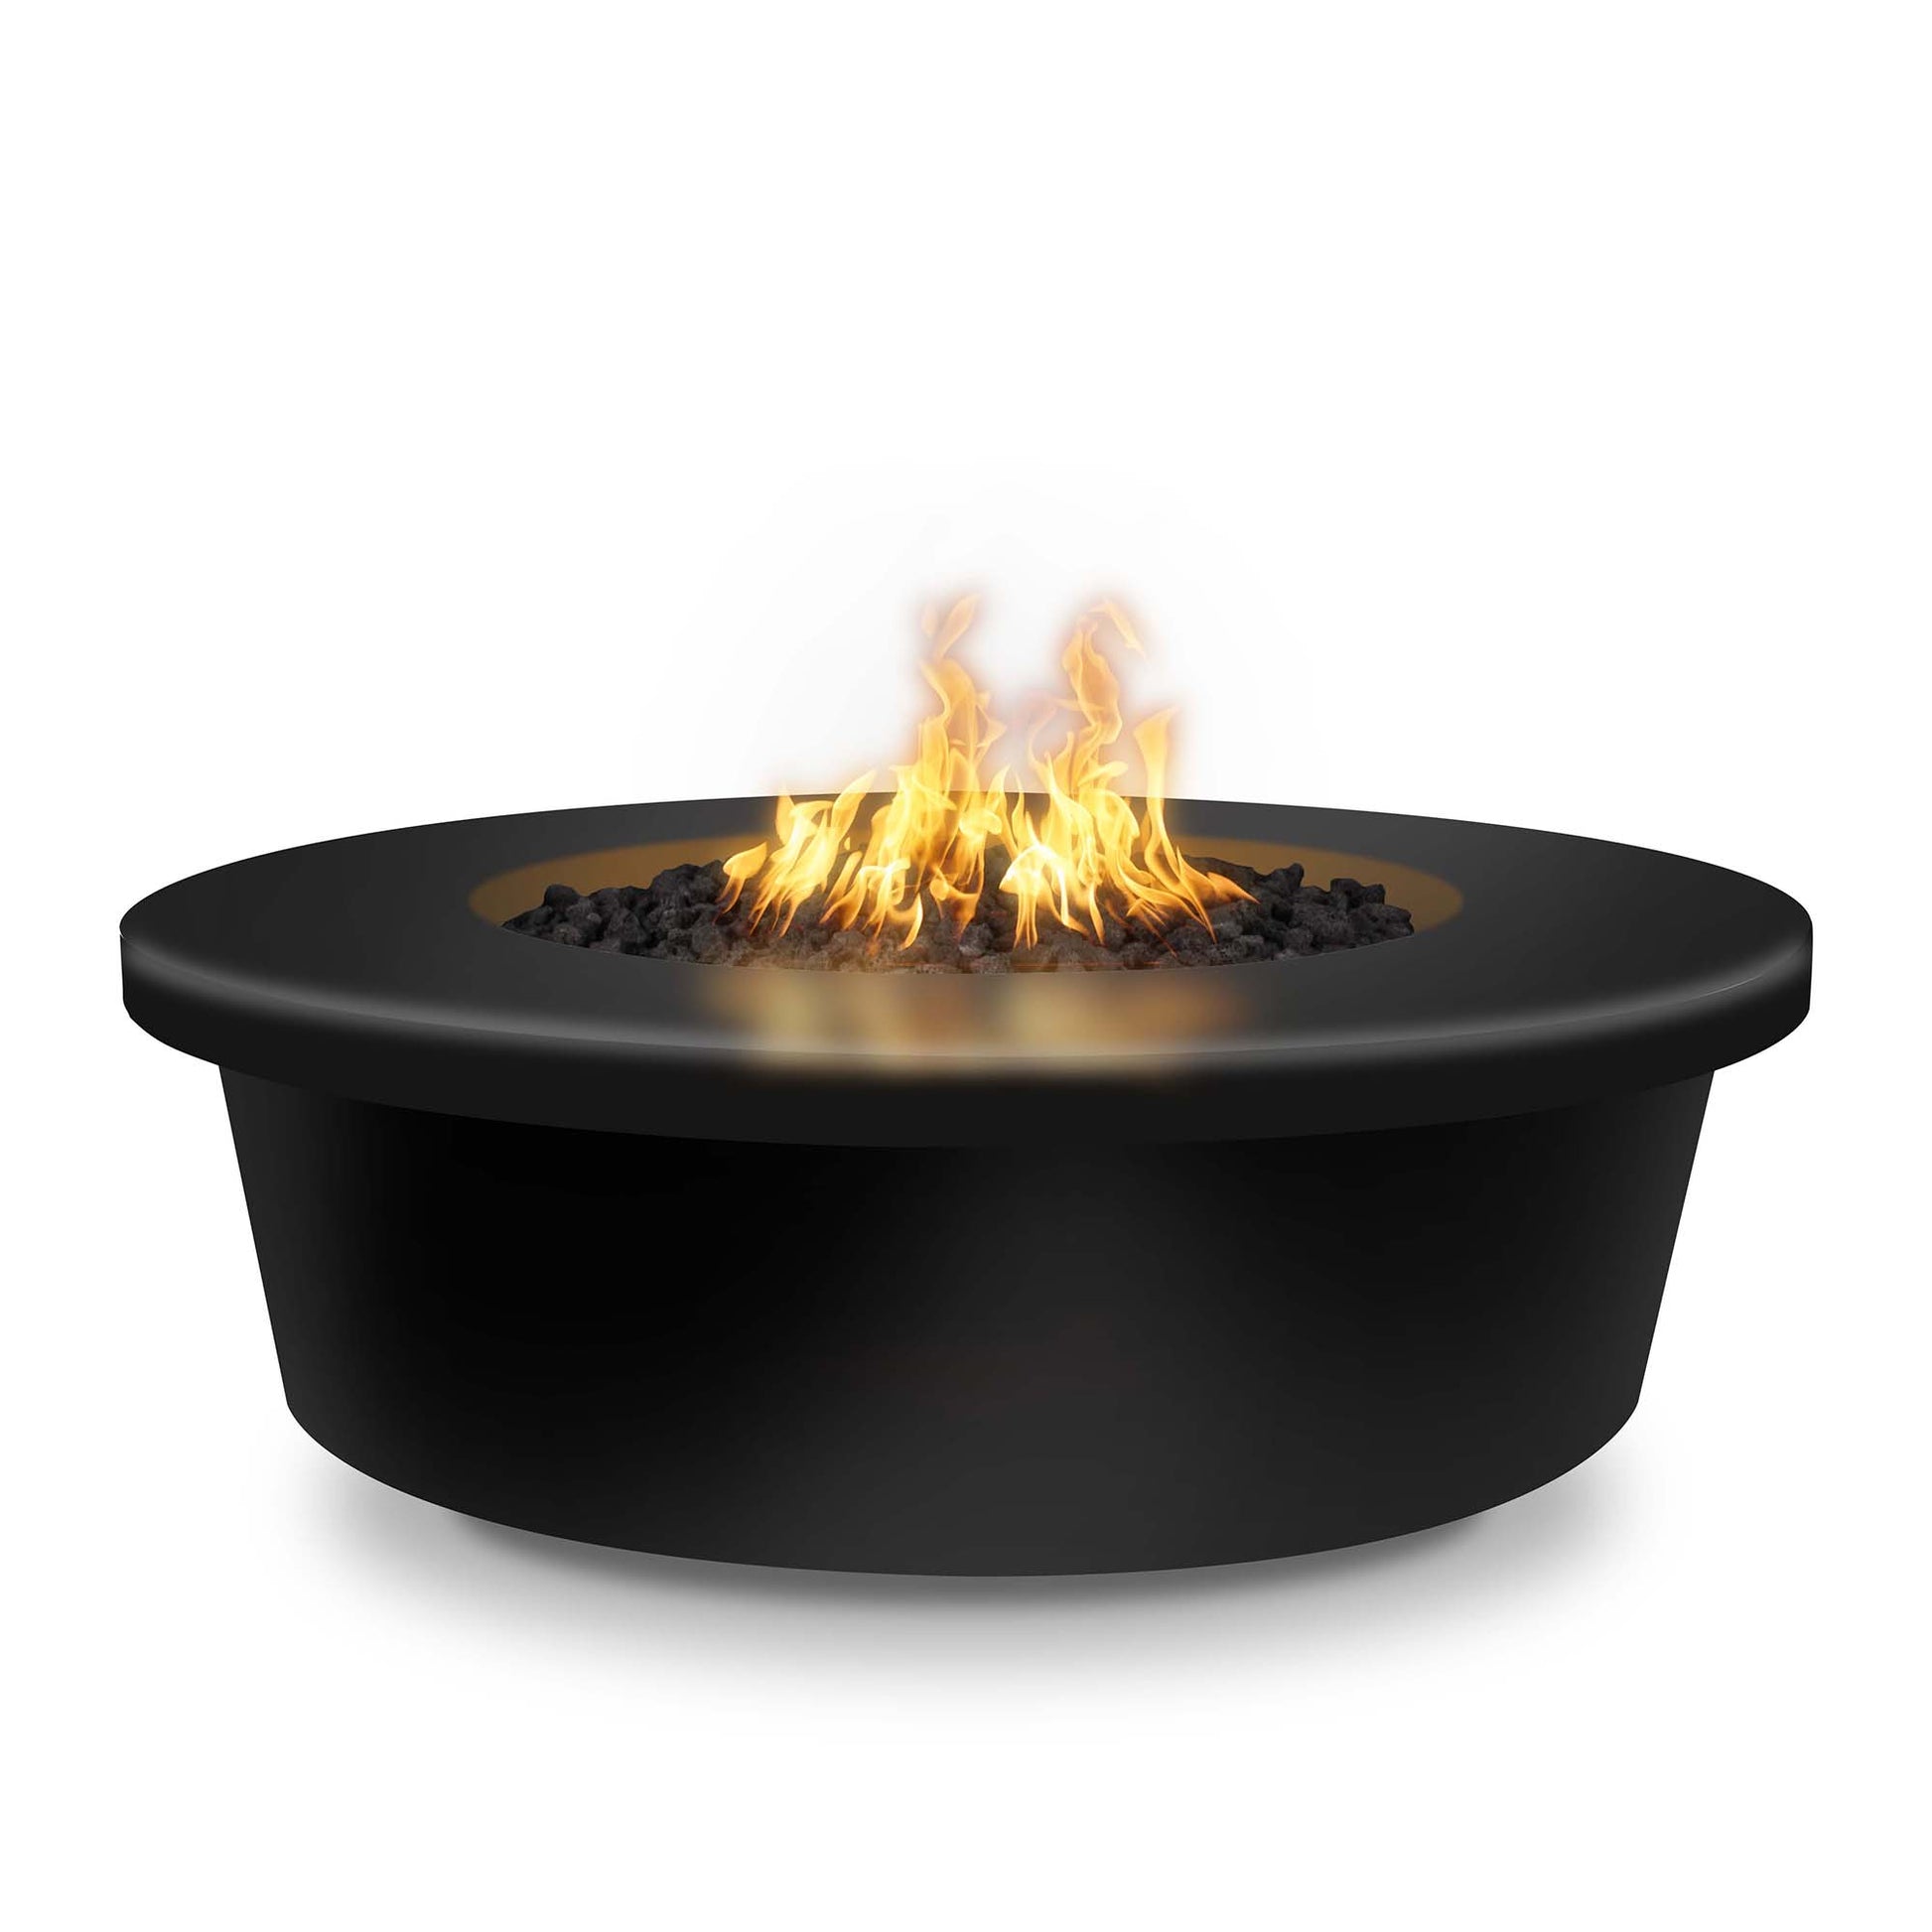 The Outdoor Plus Round Tempe 48" Stainless Steel Natural Gas Fire Pit with 12V Electronic Ignition